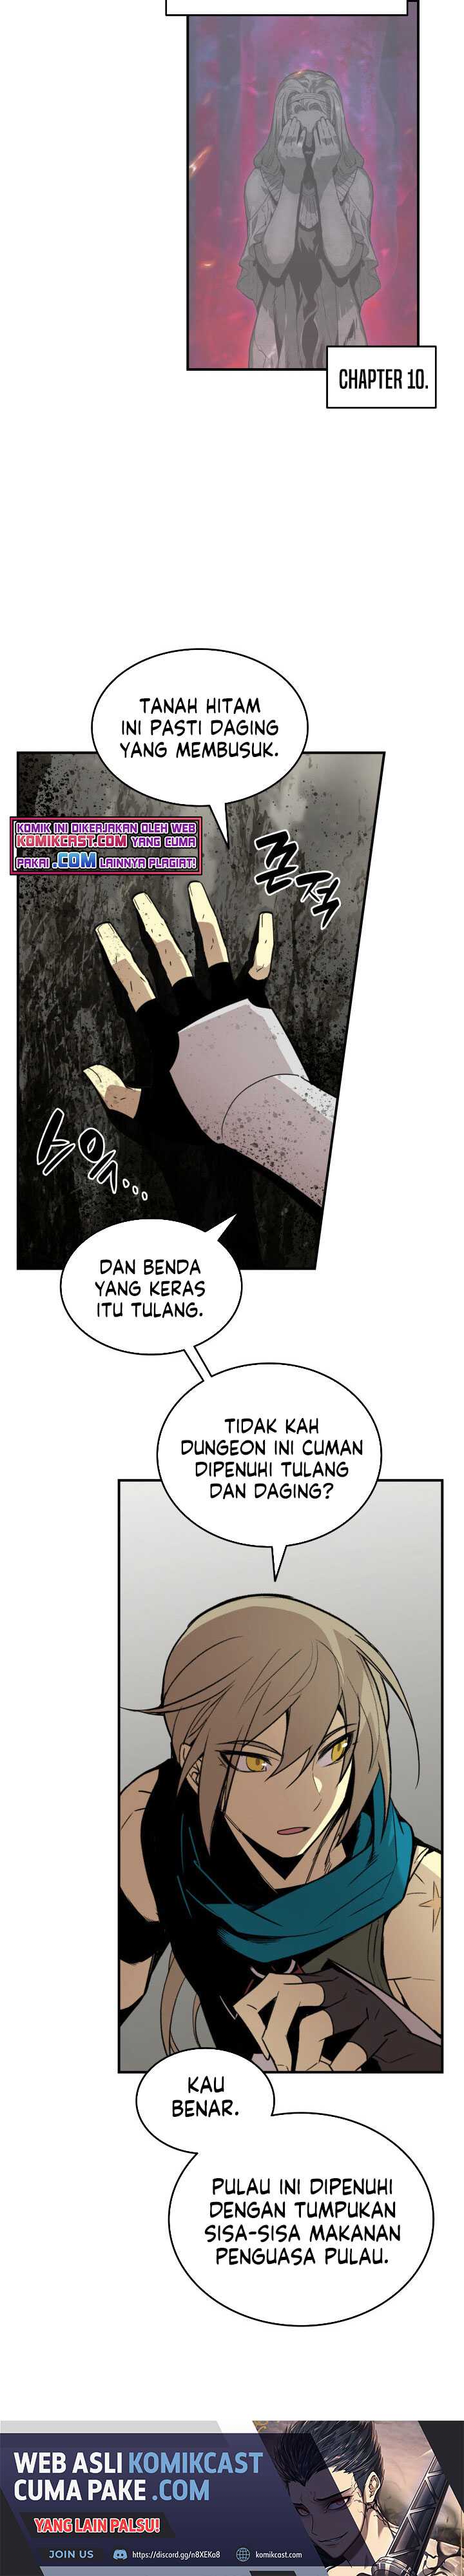 Worn and Torn Newbie Chapter 88 Image 7